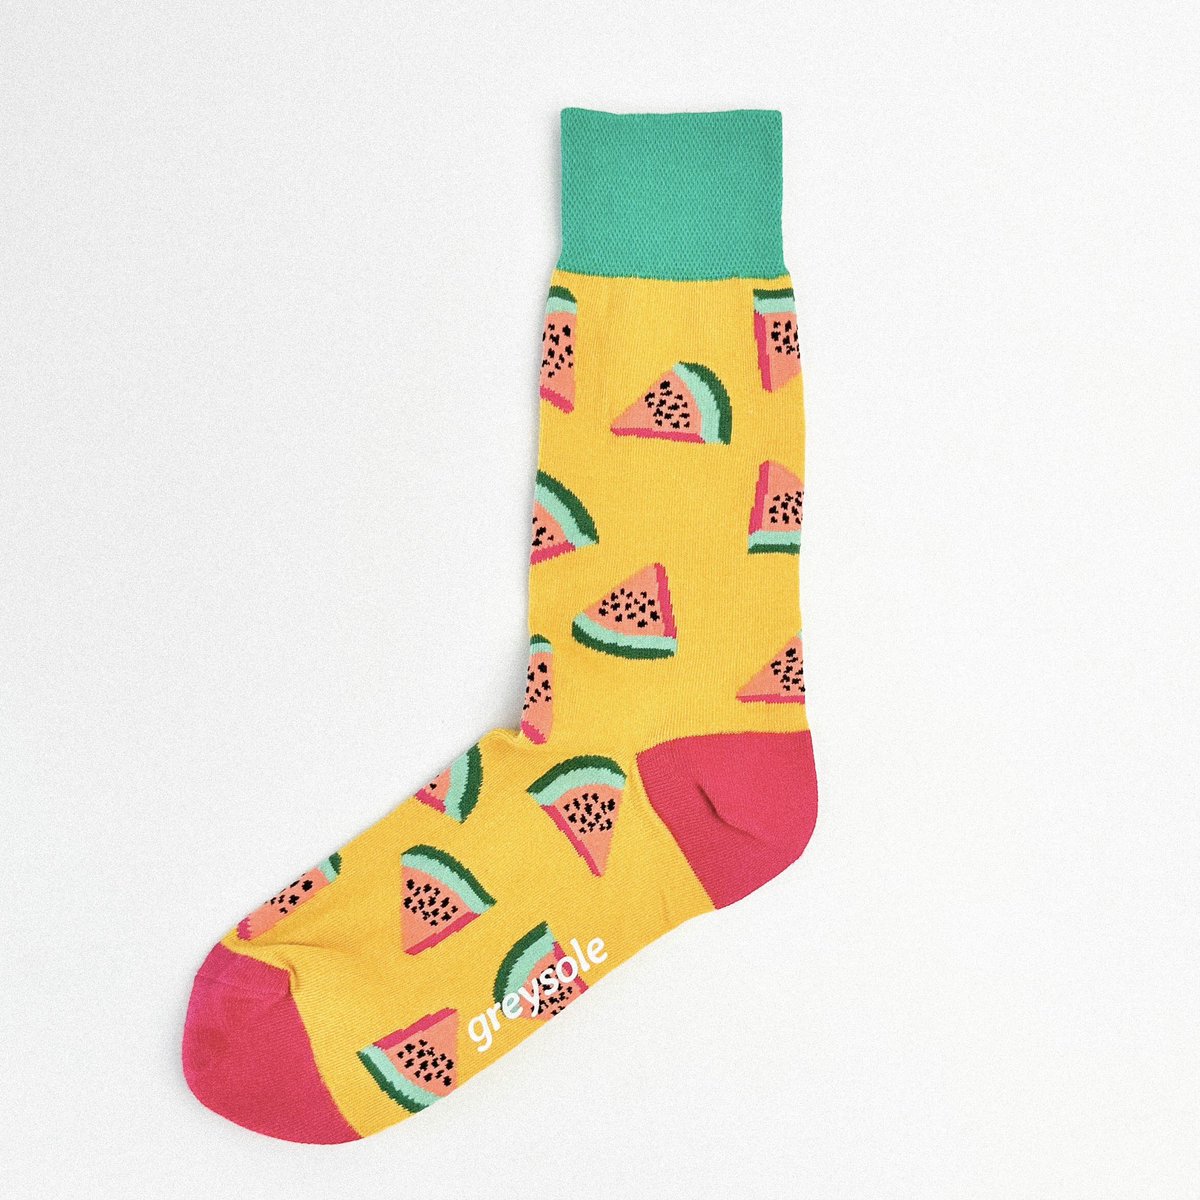 GS Watermelon Crew Socks in yellow are a burst of vibrant color and playful design that will undoubtedly put a spring in your step. These aren’t your ordinary socks; they’re a fashion statement, a celebration of summertime, and a testament to your unique style. 🏷️40ghc